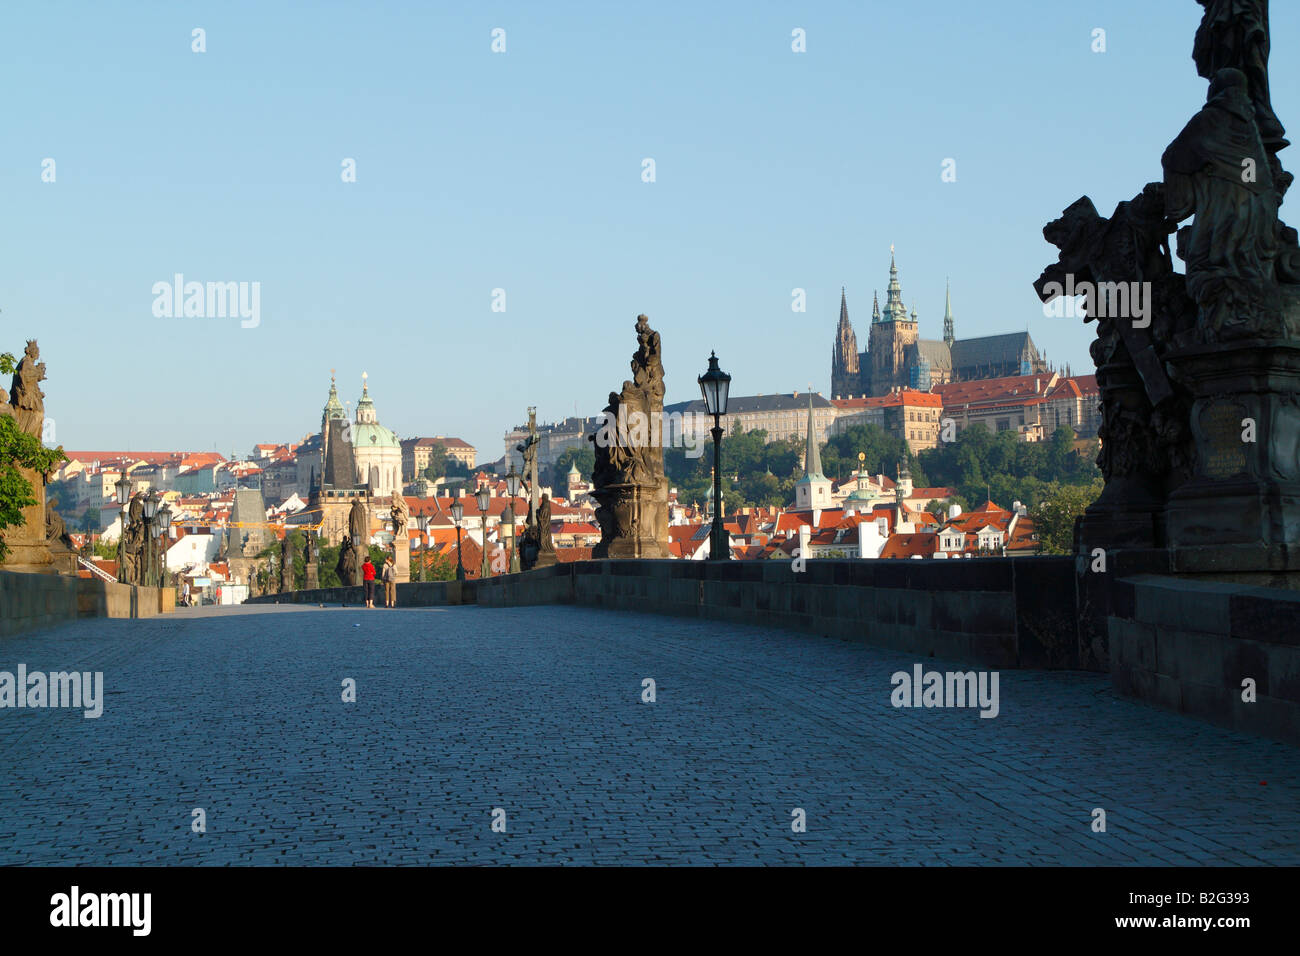 The early morning view of the Charles Bridge with the Hradcany skyline showing St Vitus Cathedral and the Prague castle Stock Photo